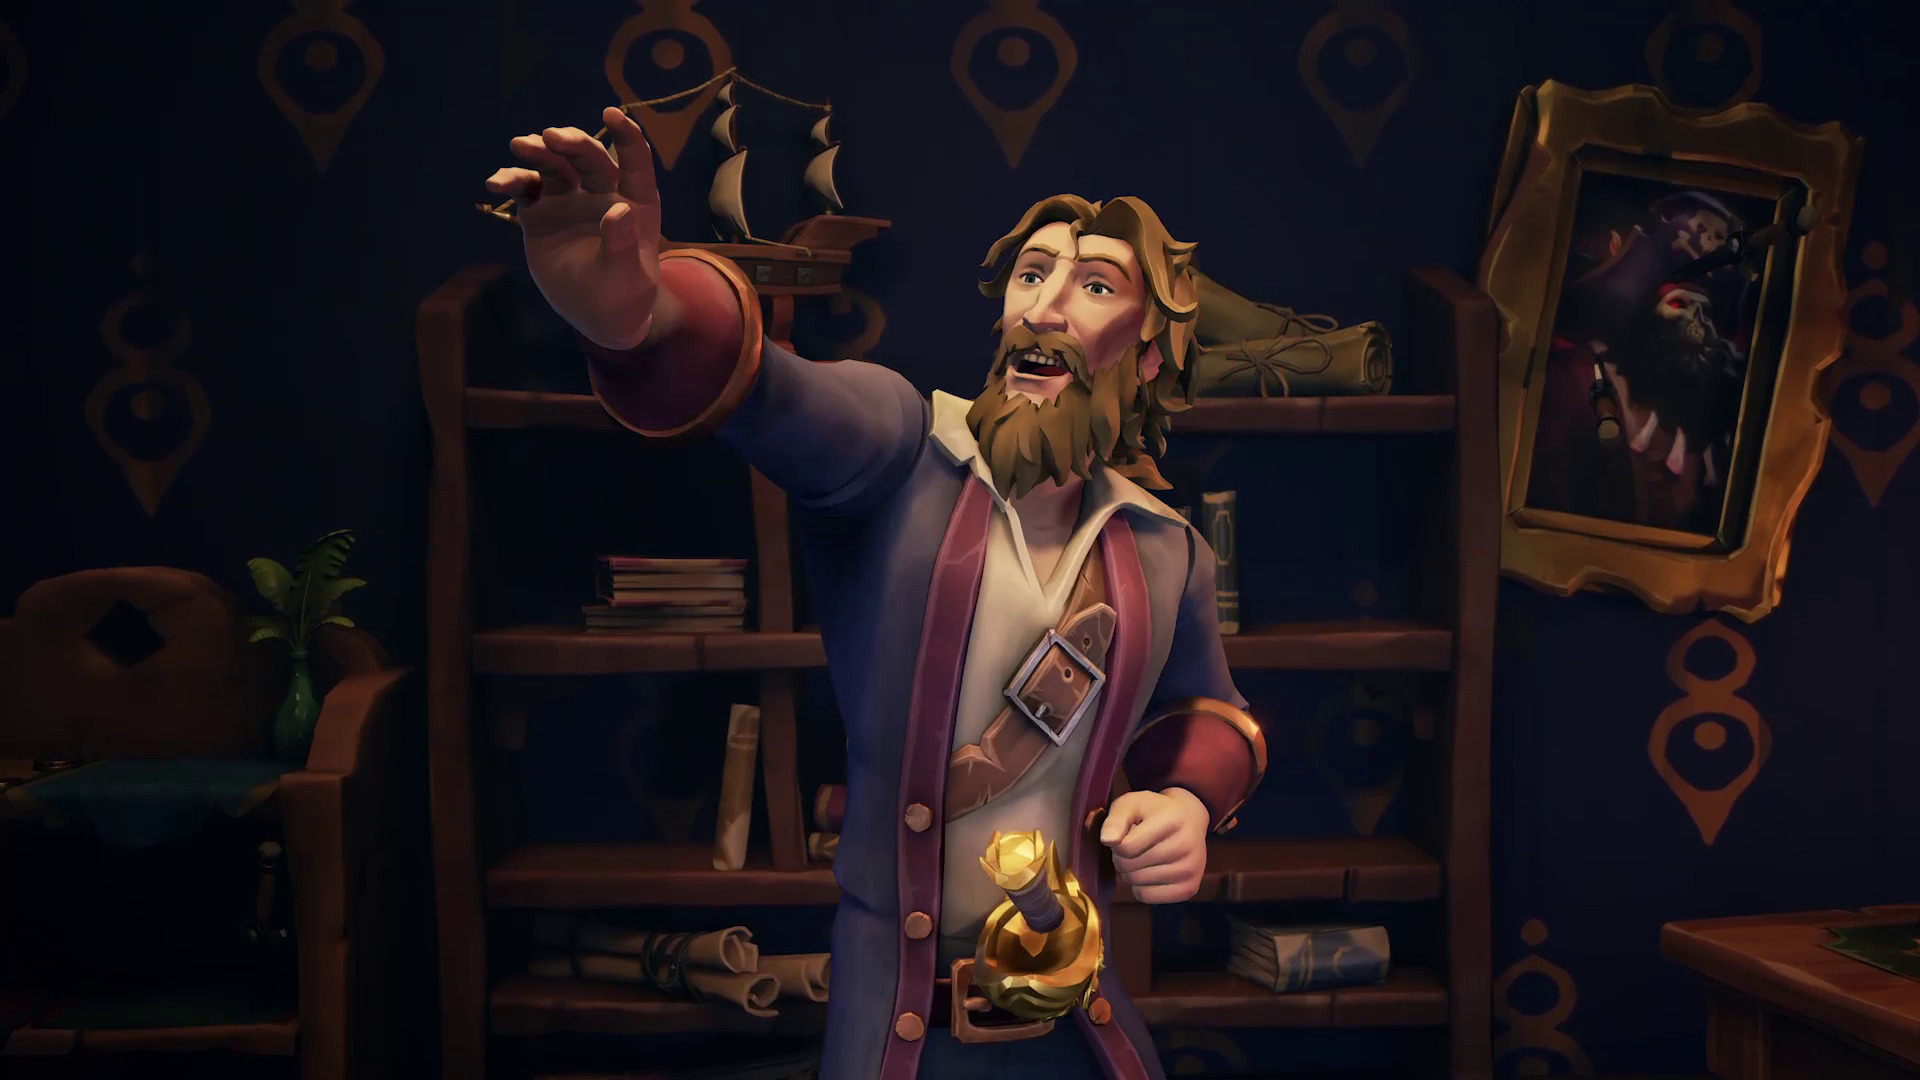 Sea of Thieves’ rarest item meets its most unlucky player as server maintenance spells unfathomable tragedy: “If you didn’t capture it, nobody would believe you”